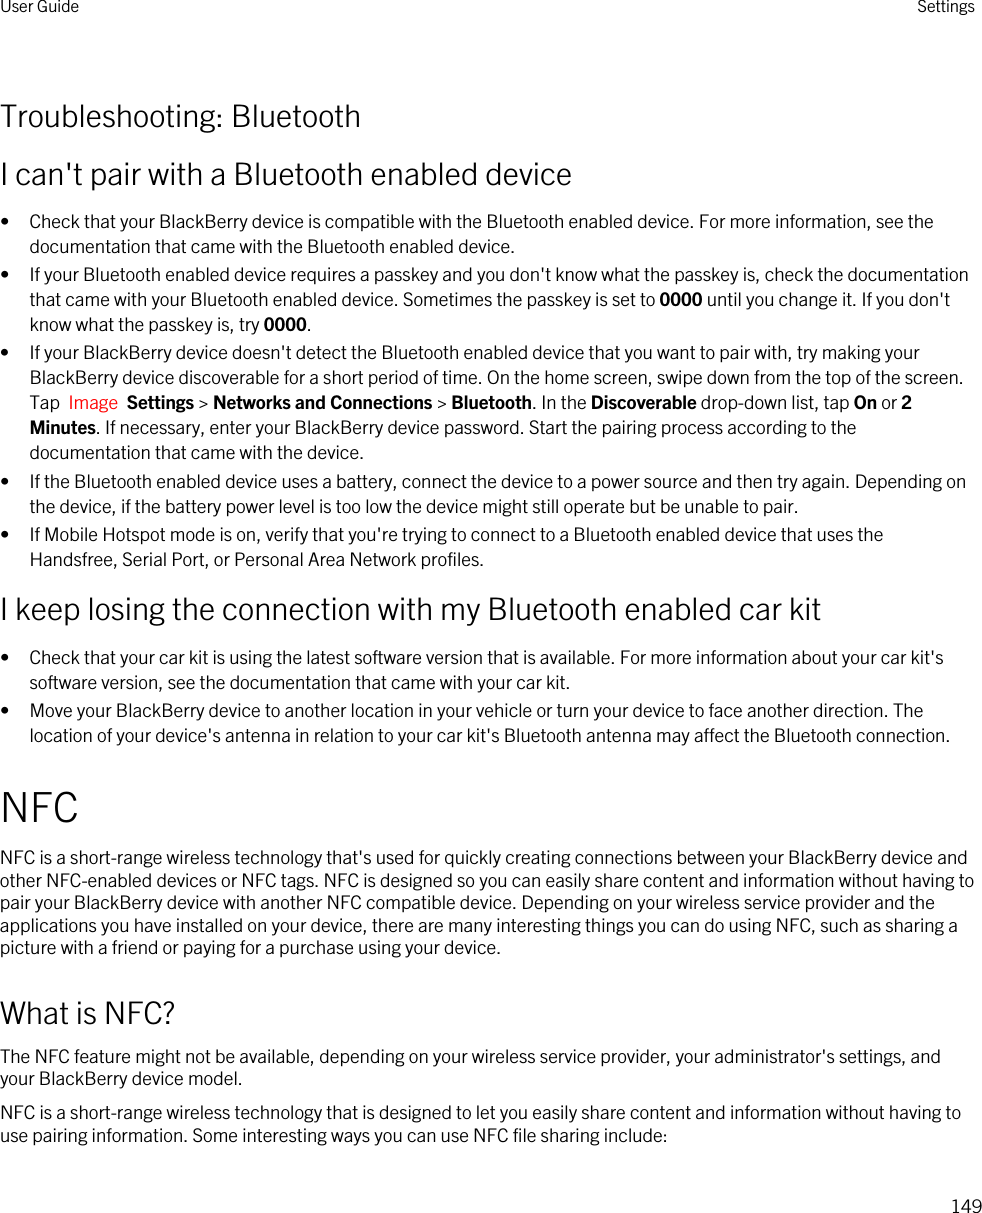 Troubleshooting: BluetoothI can&apos;t pair with a Bluetooth enabled device• Check that your BlackBerry device is compatible with the Bluetooth enabled device. For more information, see the documentation that came with the Bluetooth enabled device.• If your Bluetooth enabled device requires a passkey and you don&apos;t know what the passkey is, check the documentation that came with your Bluetooth enabled device. Sometimes the passkey is set to 0000 until you change it. If you don&apos;t know what the passkey is, try 0000.• If your BlackBerry device doesn&apos;t detect the Bluetooth enabled device that you want to pair with, try making your BlackBerry device discoverable for a short period of time. On the home screen, swipe down from the top of the screen. Tap  Image  Settings &gt; Networks and Connections &gt; Bluetooth. In the Discoverable drop-down list, tap On or 2 Minutes. If necessary, enter your BlackBerry device password. Start the pairing process according to the documentation that came with the device.• If the Bluetooth enabled device uses a battery, connect the device to a power source and then try again. Depending on the device, if the battery power level is too low the device might still operate but be unable to pair.• If Mobile Hotspot mode is on, verify that you&apos;re trying to connect to a Bluetooth enabled device that uses the Handsfree, Serial Port, or Personal Area Network profiles.I keep losing the connection with my Bluetooth enabled car kit• Check that your car kit is using the latest software version that is available. For more information about your car kit&apos;s software version, see the documentation that came with your car kit.• Move your BlackBerry device to another location in your vehicle or turn your device to face another direction. The location of your device&apos;s antenna in relation to your car kit&apos;s Bluetooth antenna may affect the Bluetooth connection.NFCNFC is a short-range wireless technology that&apos;s used for quickly creating connections between your BlackBerry device and other NFC-enabled devices or NFC tags. NFC is designed so you can easily share content and information without having to pair your BlackBerry device with another NFC compatible device. Depending on your wireless service provider and the applications you have installed on your device, there are many interesting things you can do using NFC, such as sharing a picture with a friend or paying for a purchase using your device.What is NFC?The NFC feature might not be available, depending on your wireless service provider, your administrator&apos;s settings, and your BlackBerry device model.NFC is a short-range wireless technology that is designed to let you easily share content and information without having to use pairing information. Some interesting ways you can use NFC file sharing include:User Guide Settings149